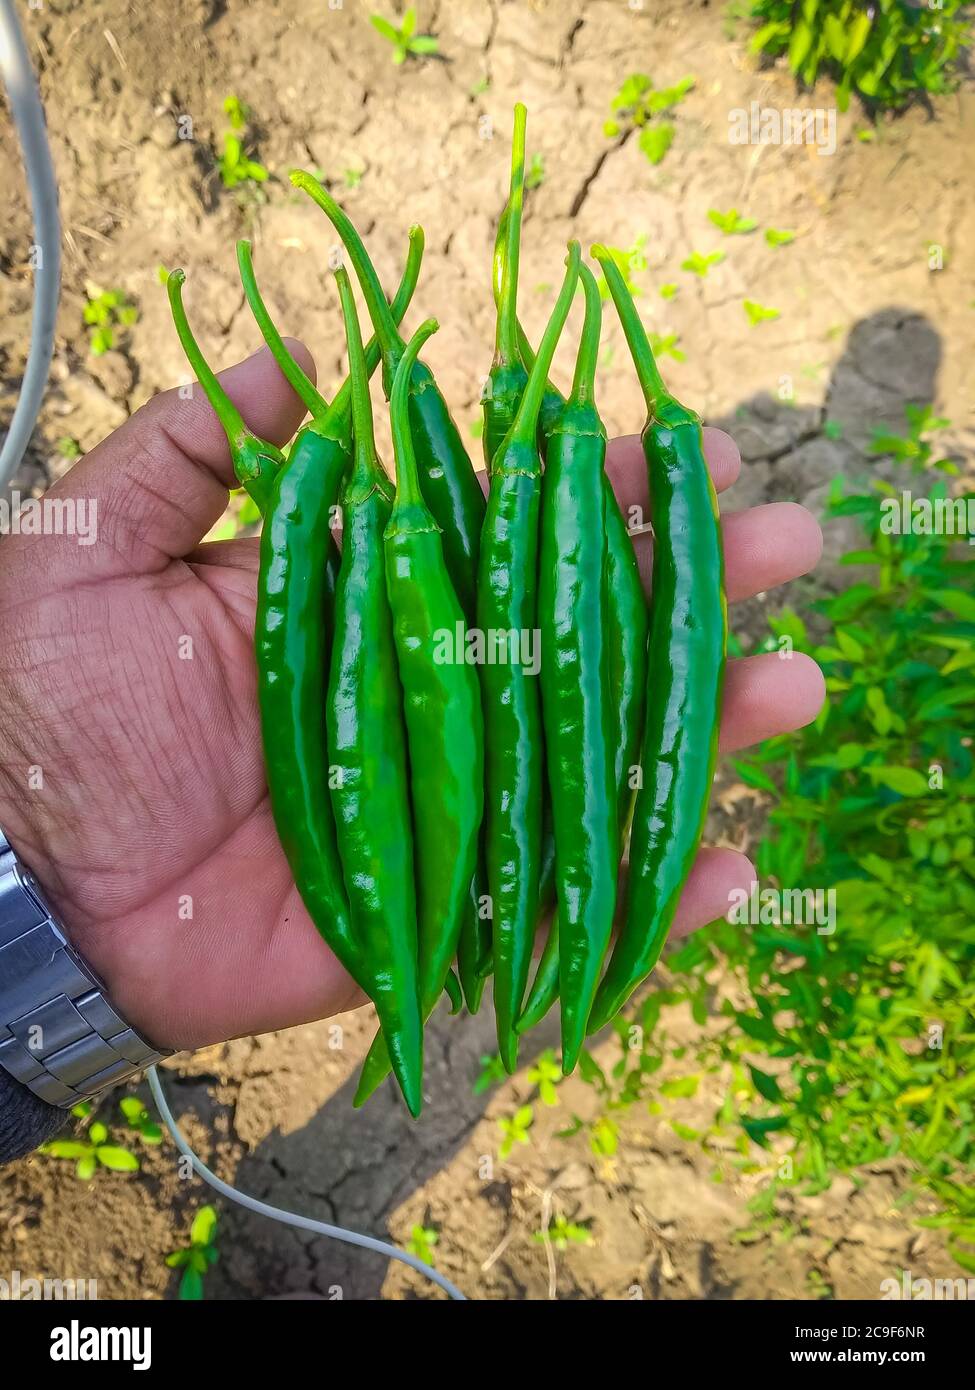 Green Chillies On The Hand. Indian Summer Agriculture. Indian Vegitable. Stock Photo